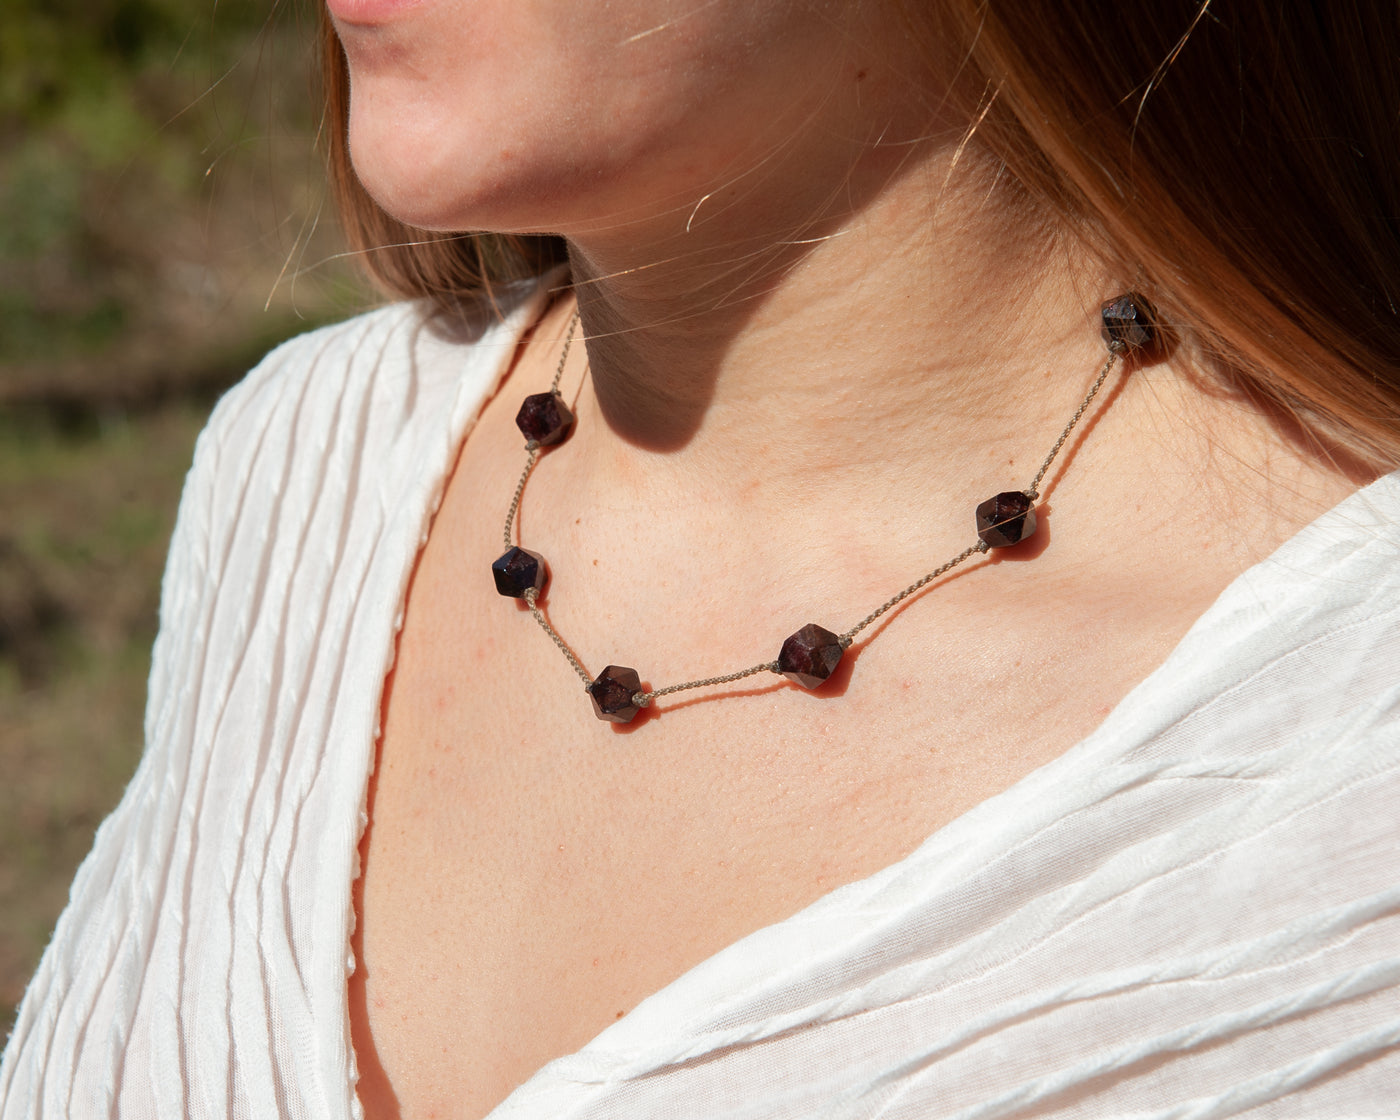 Empress Necklace - Garnet Starcut Large - Only 5 available!